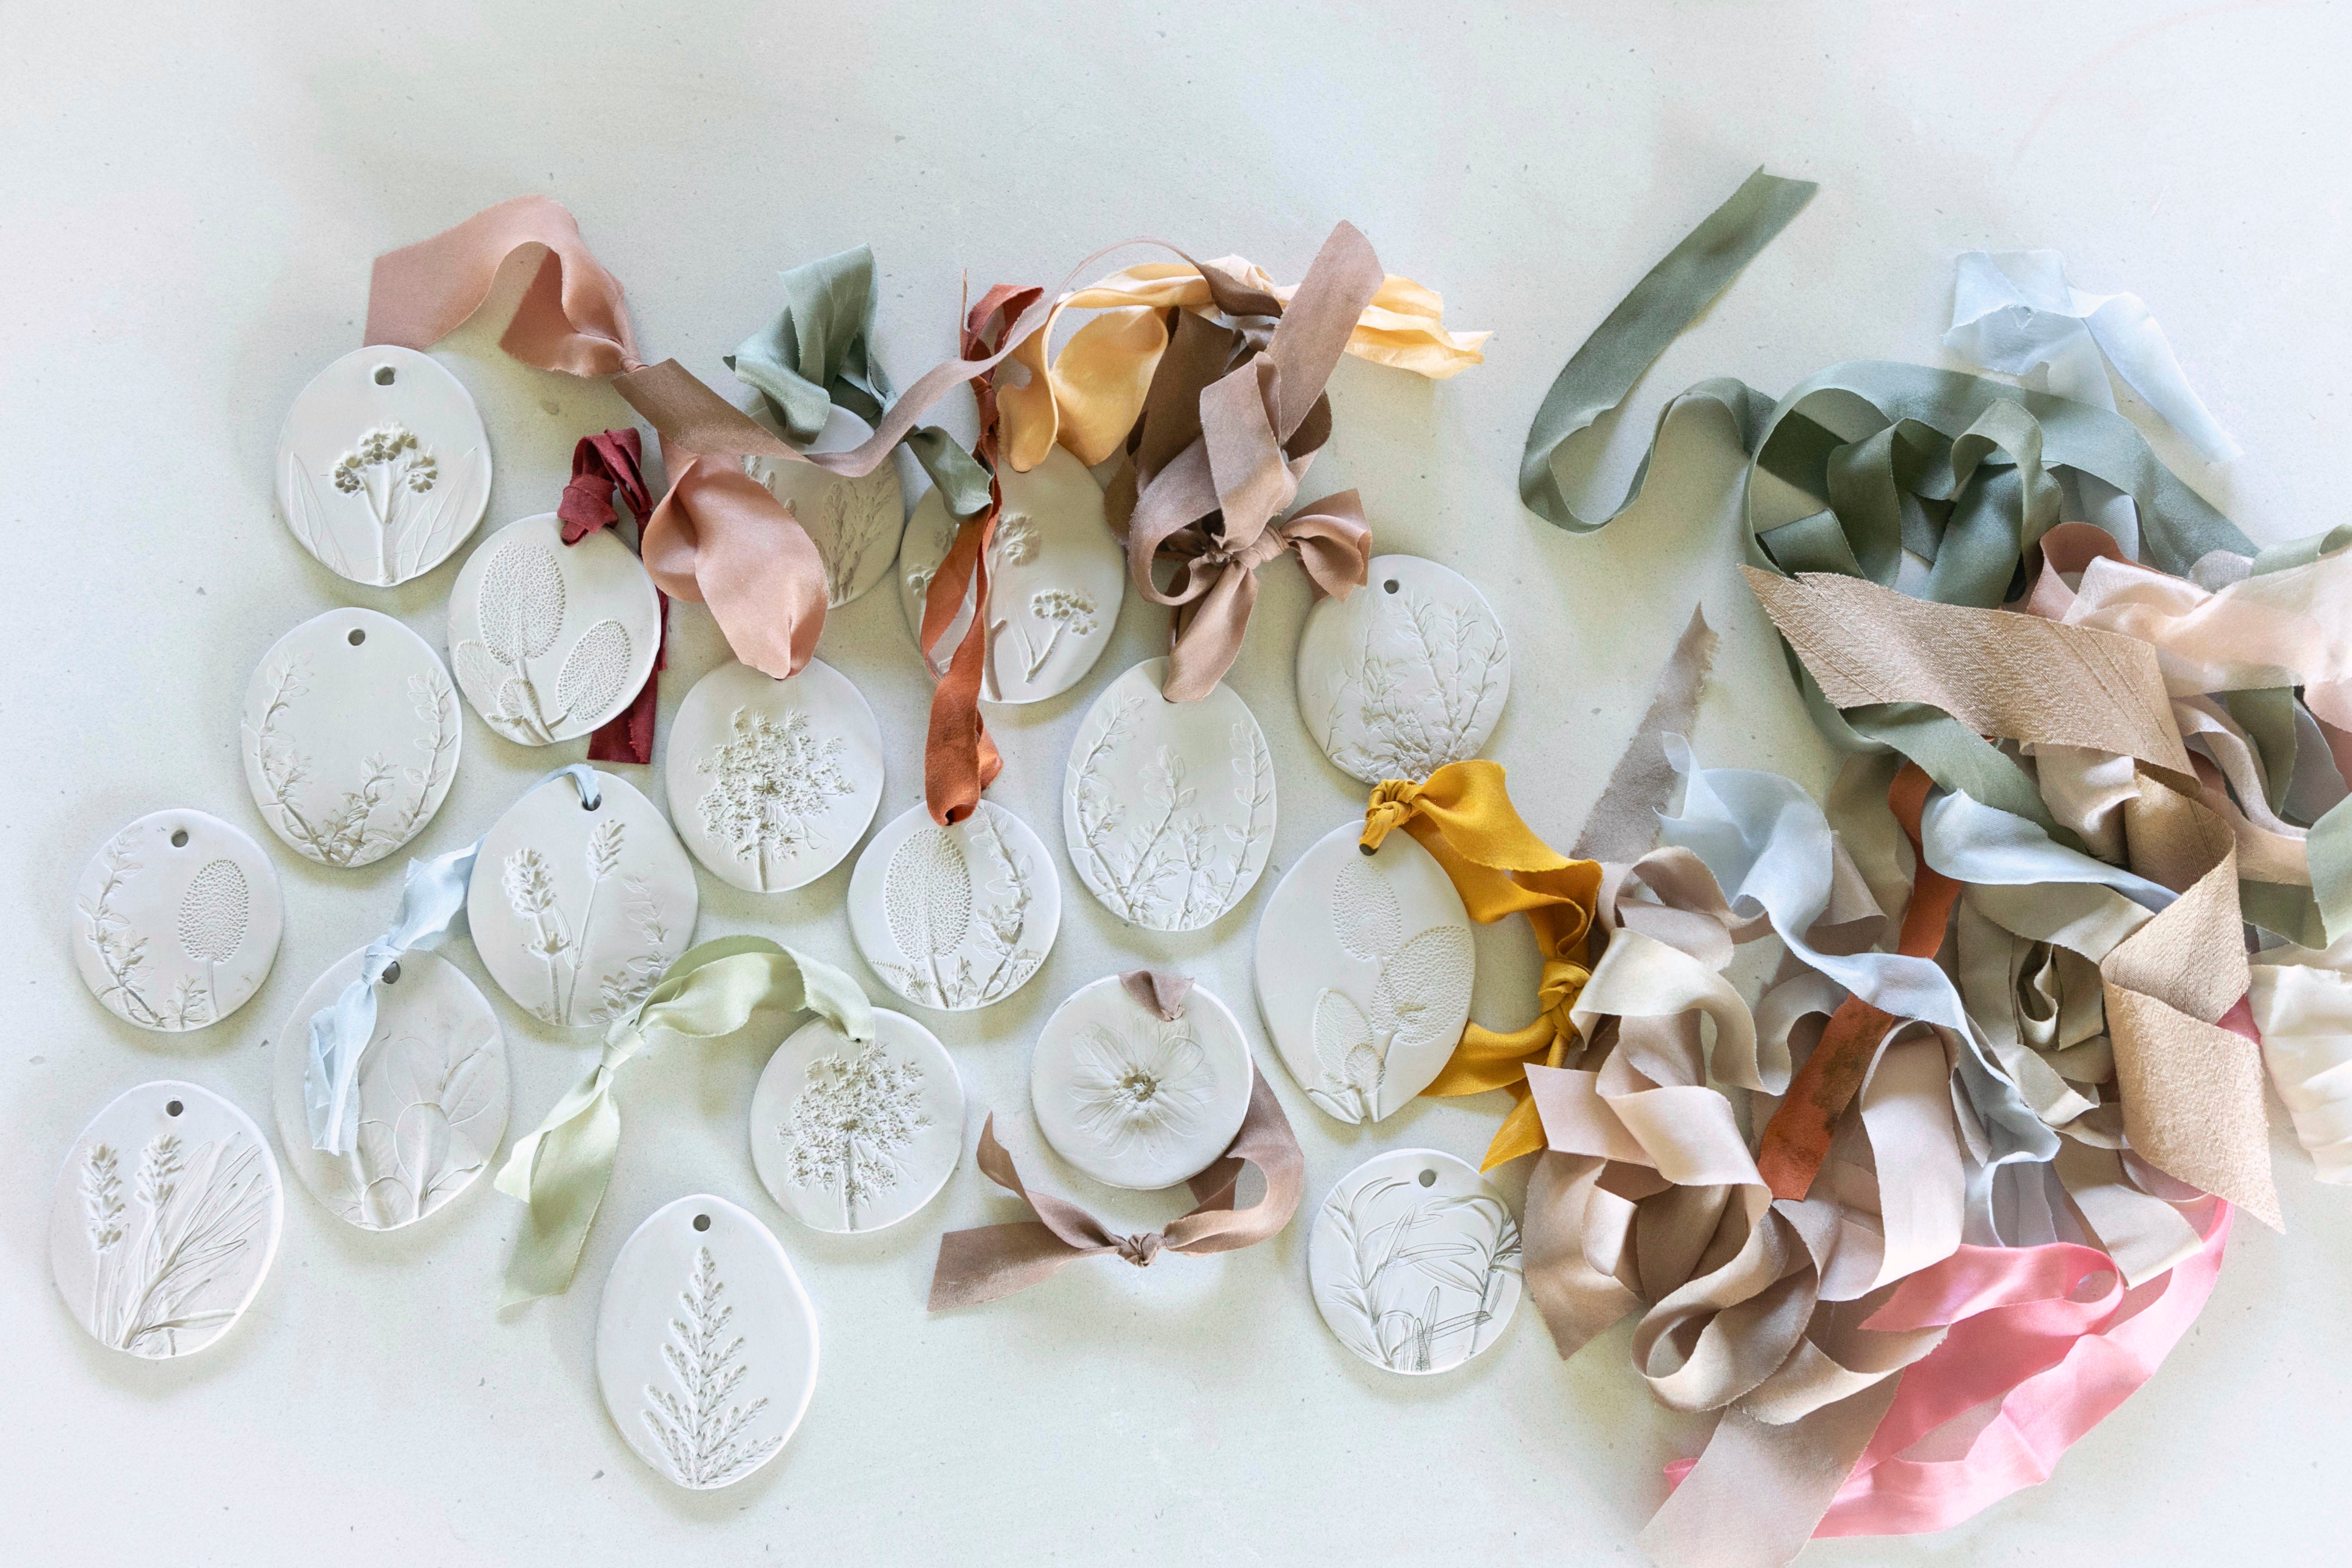 Botanical Imprinted Clay Ornaments with Silk Ribbons